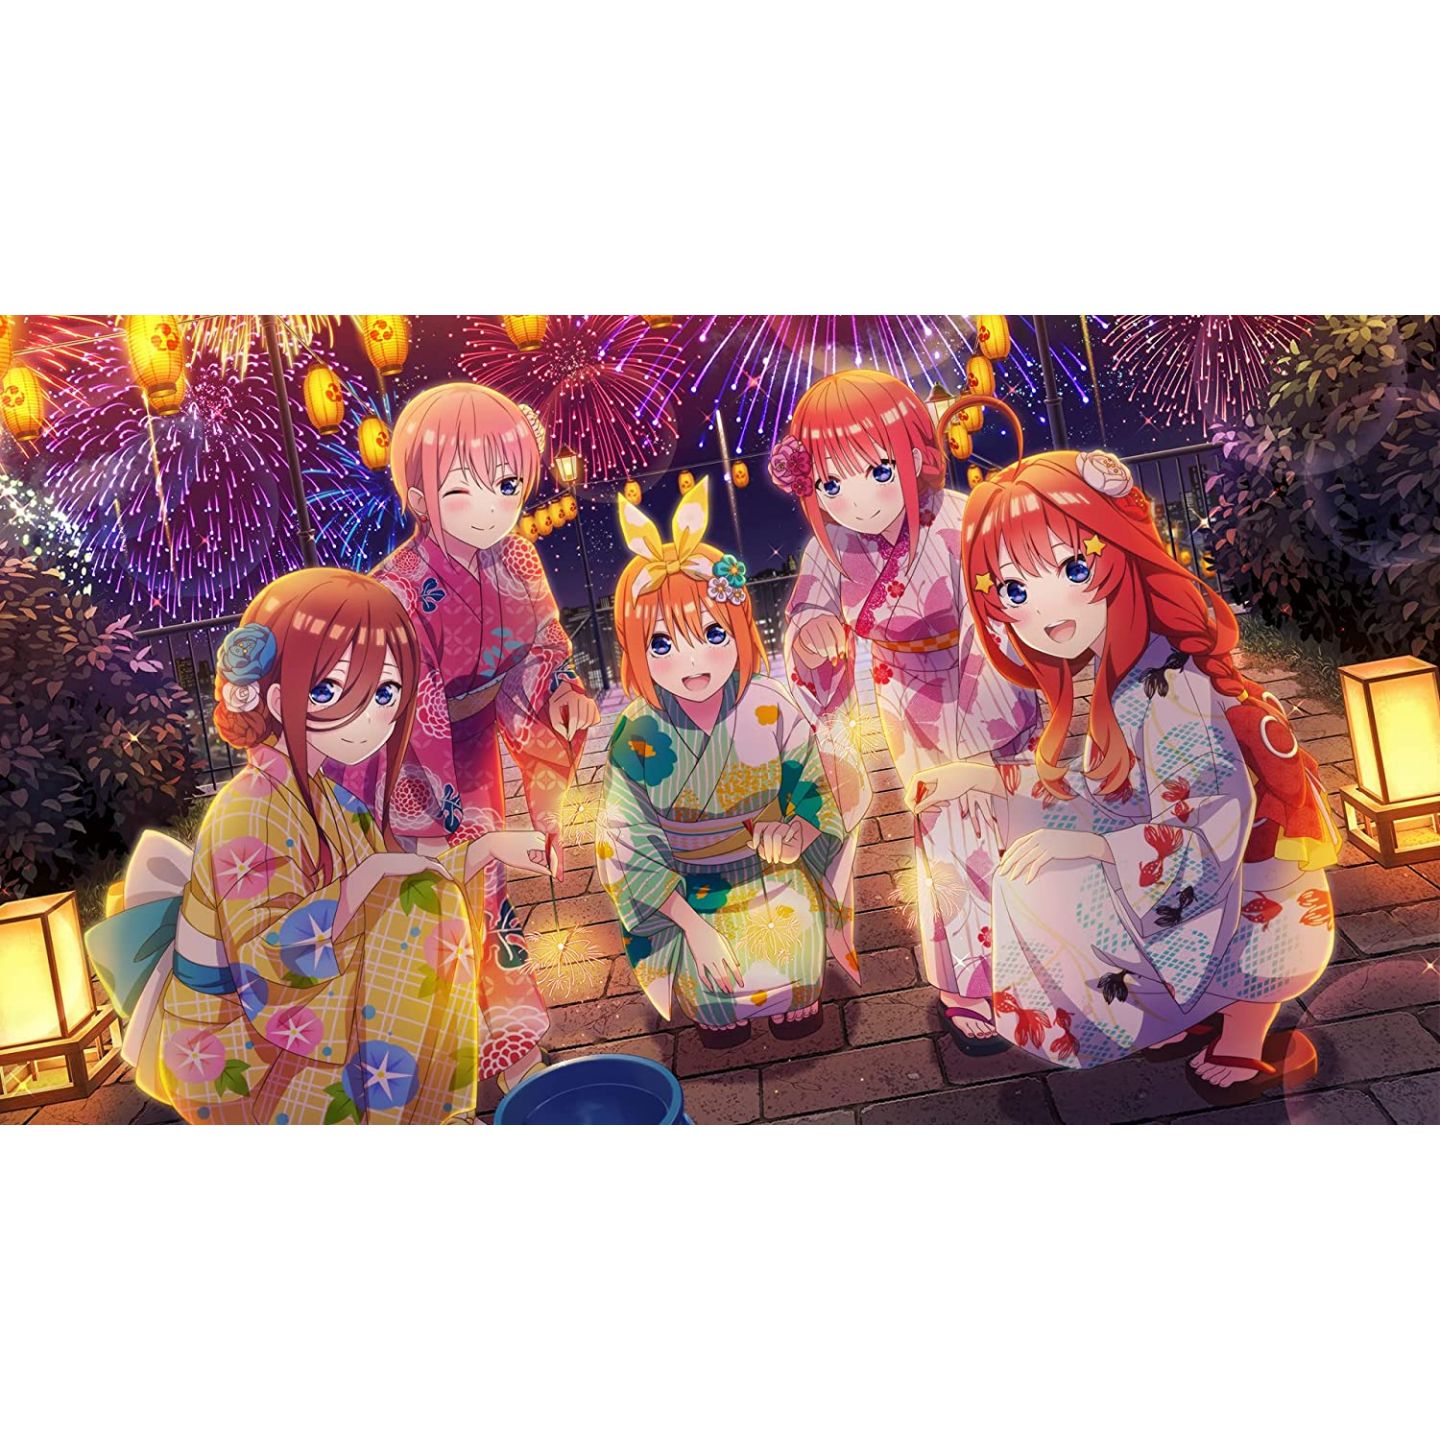 PS4 The Quintessential Quintuplets Gotoubun No Hanayome From Japan free  shipping